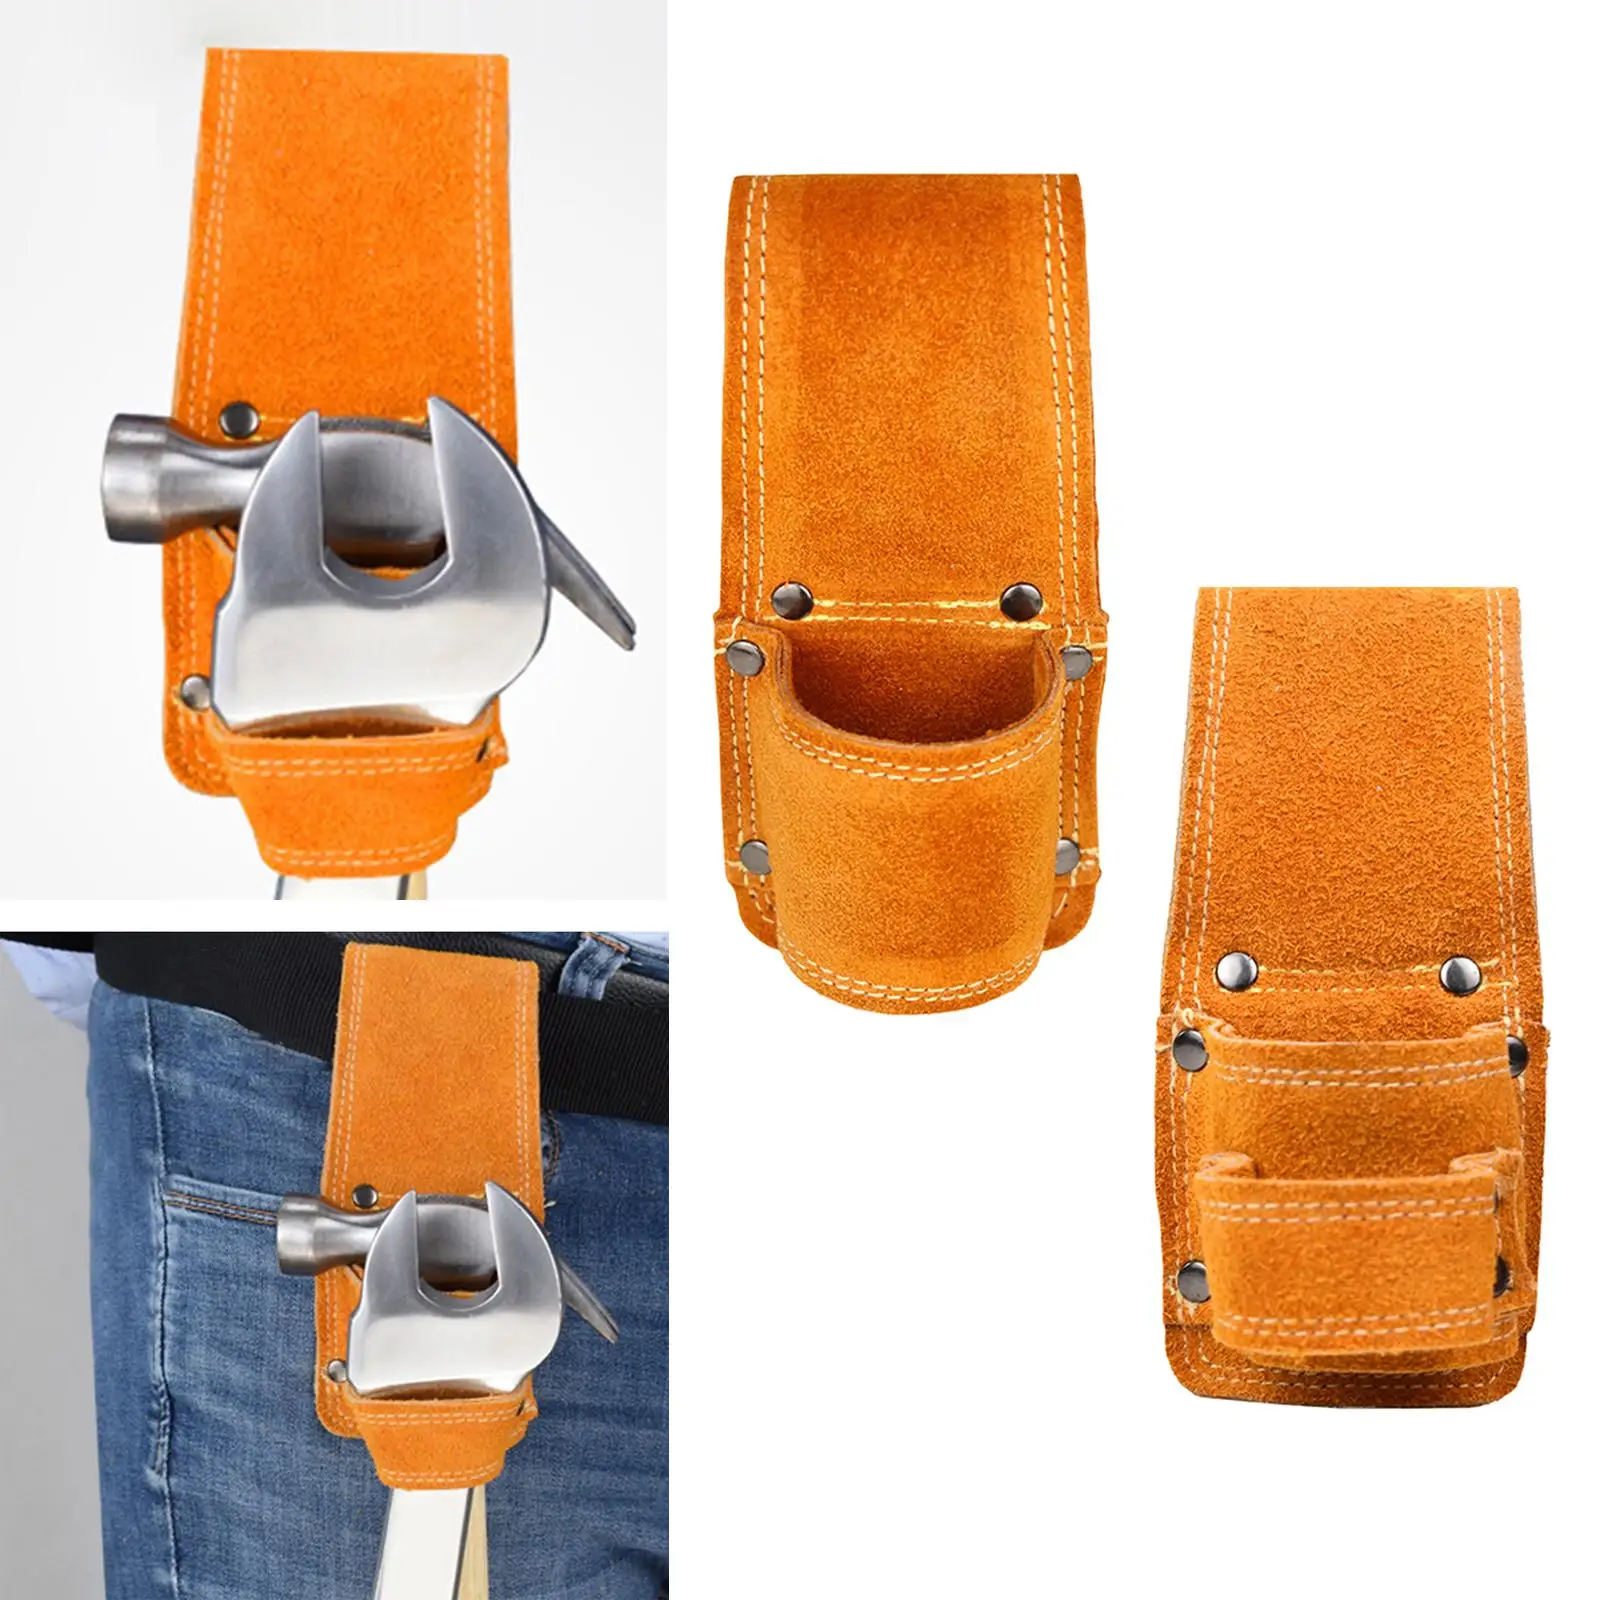 PU Leather Axe Holster Organizer Sheath Tool Belt Holster Tool for Wrench